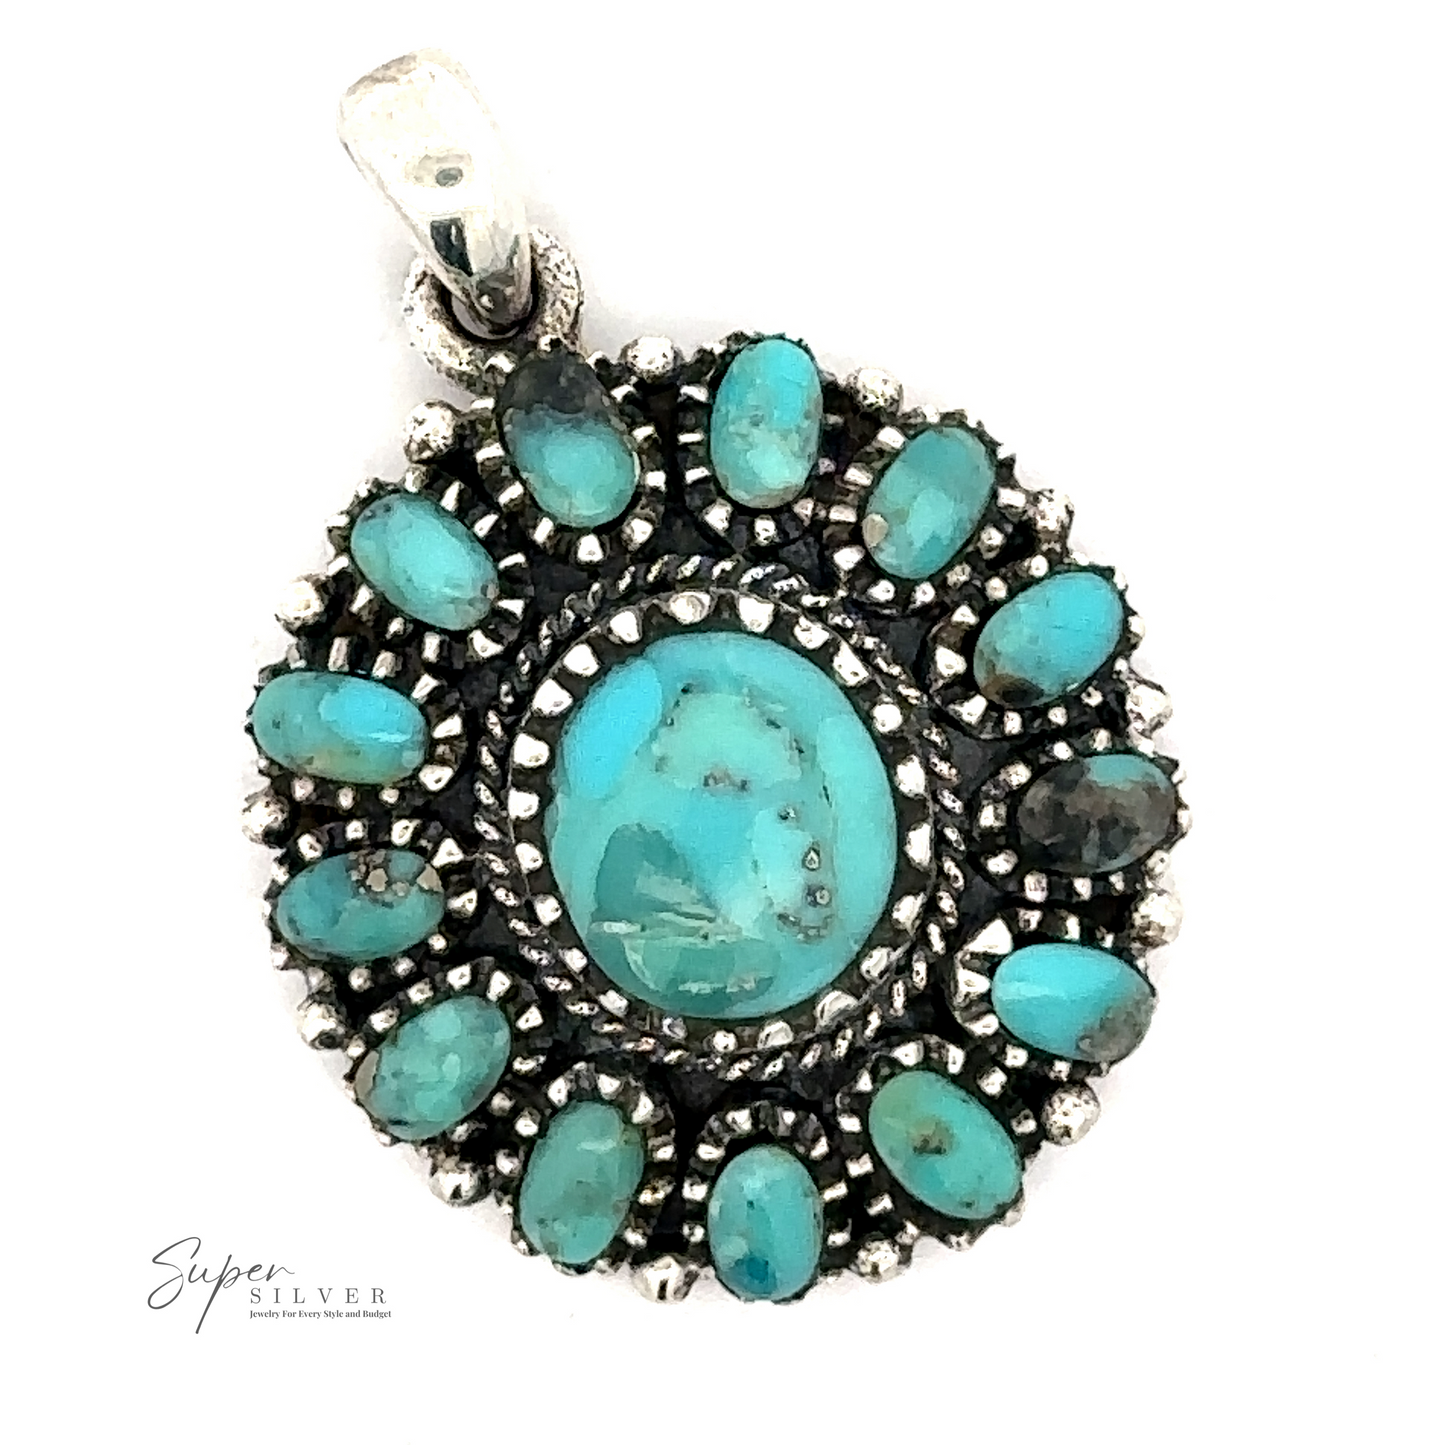 
                  
                    A Native-Inspired Turquoise Flower Cluster Pendant crafted from .925 Sterling Silver features multiple small turquoise stones encircling a larger central stone. A small bail is attached at the top for a chain, embodying a bohemian spirit. The "Super Silver" logo is visible in the bottom left corner.
                  
                